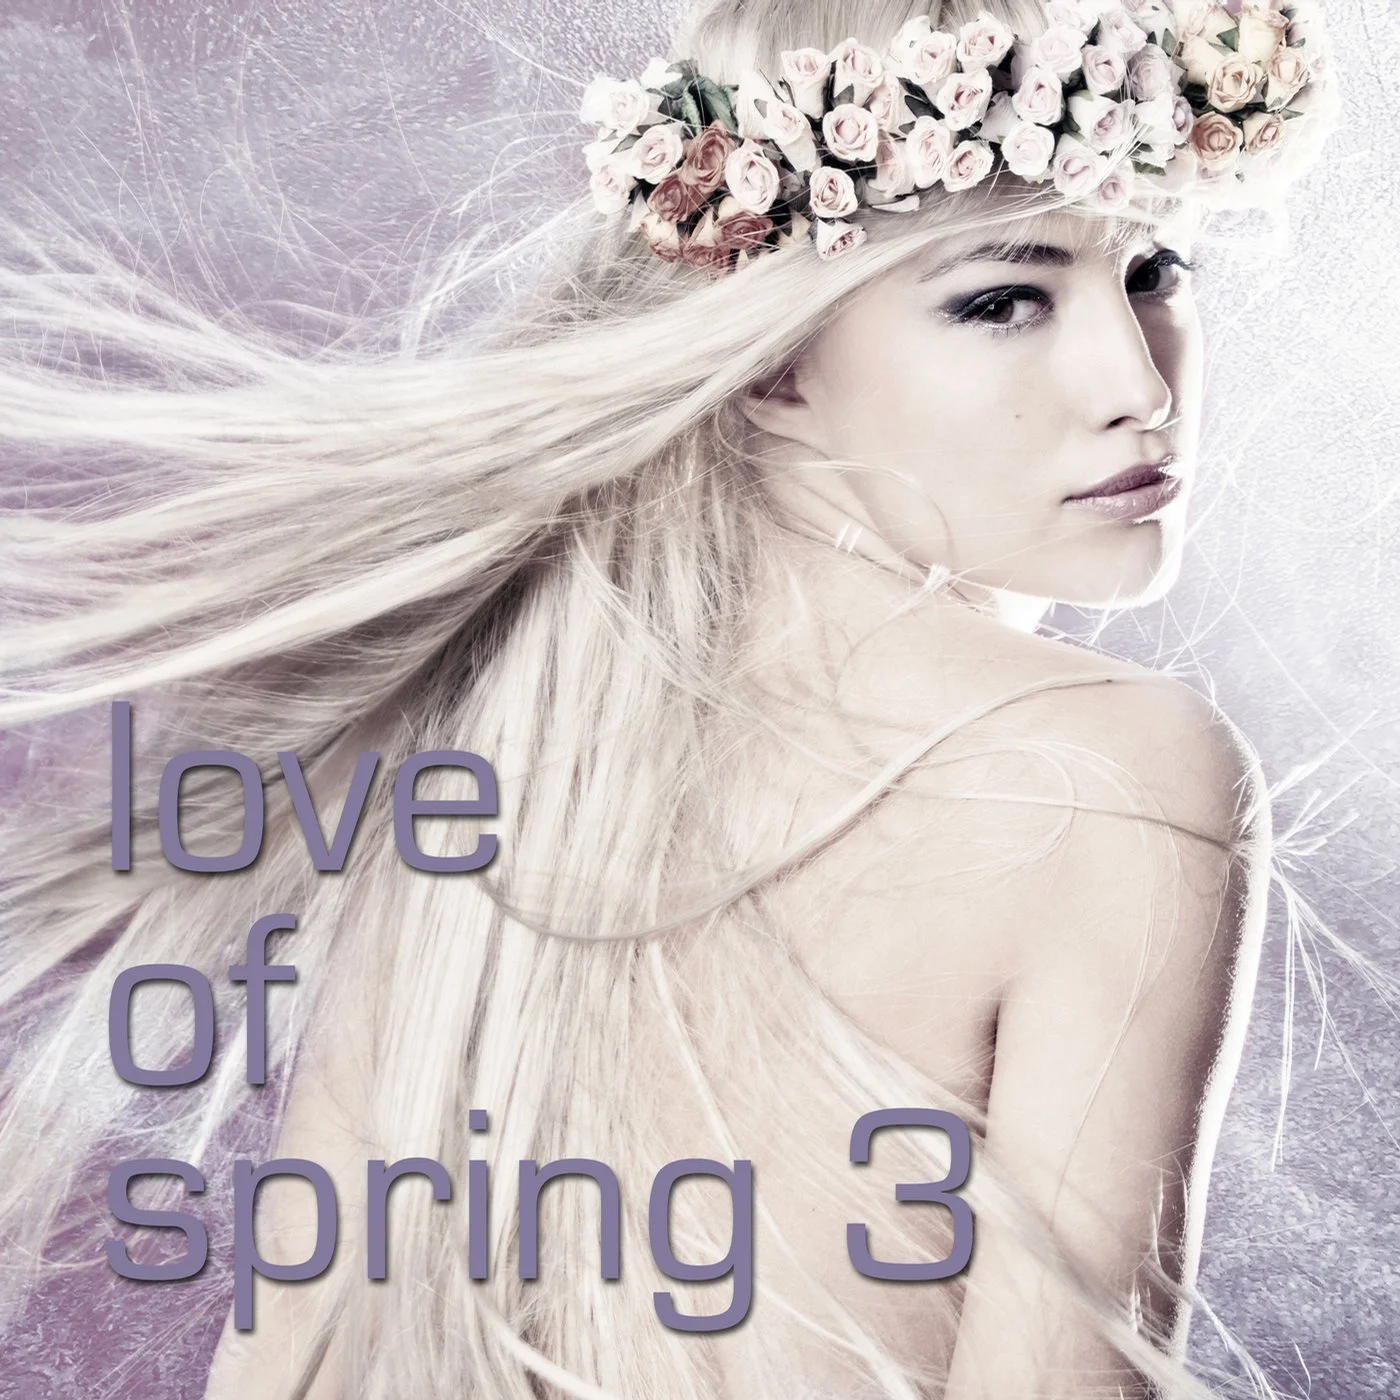 Cover von Compilation "Love of Spring 3>"